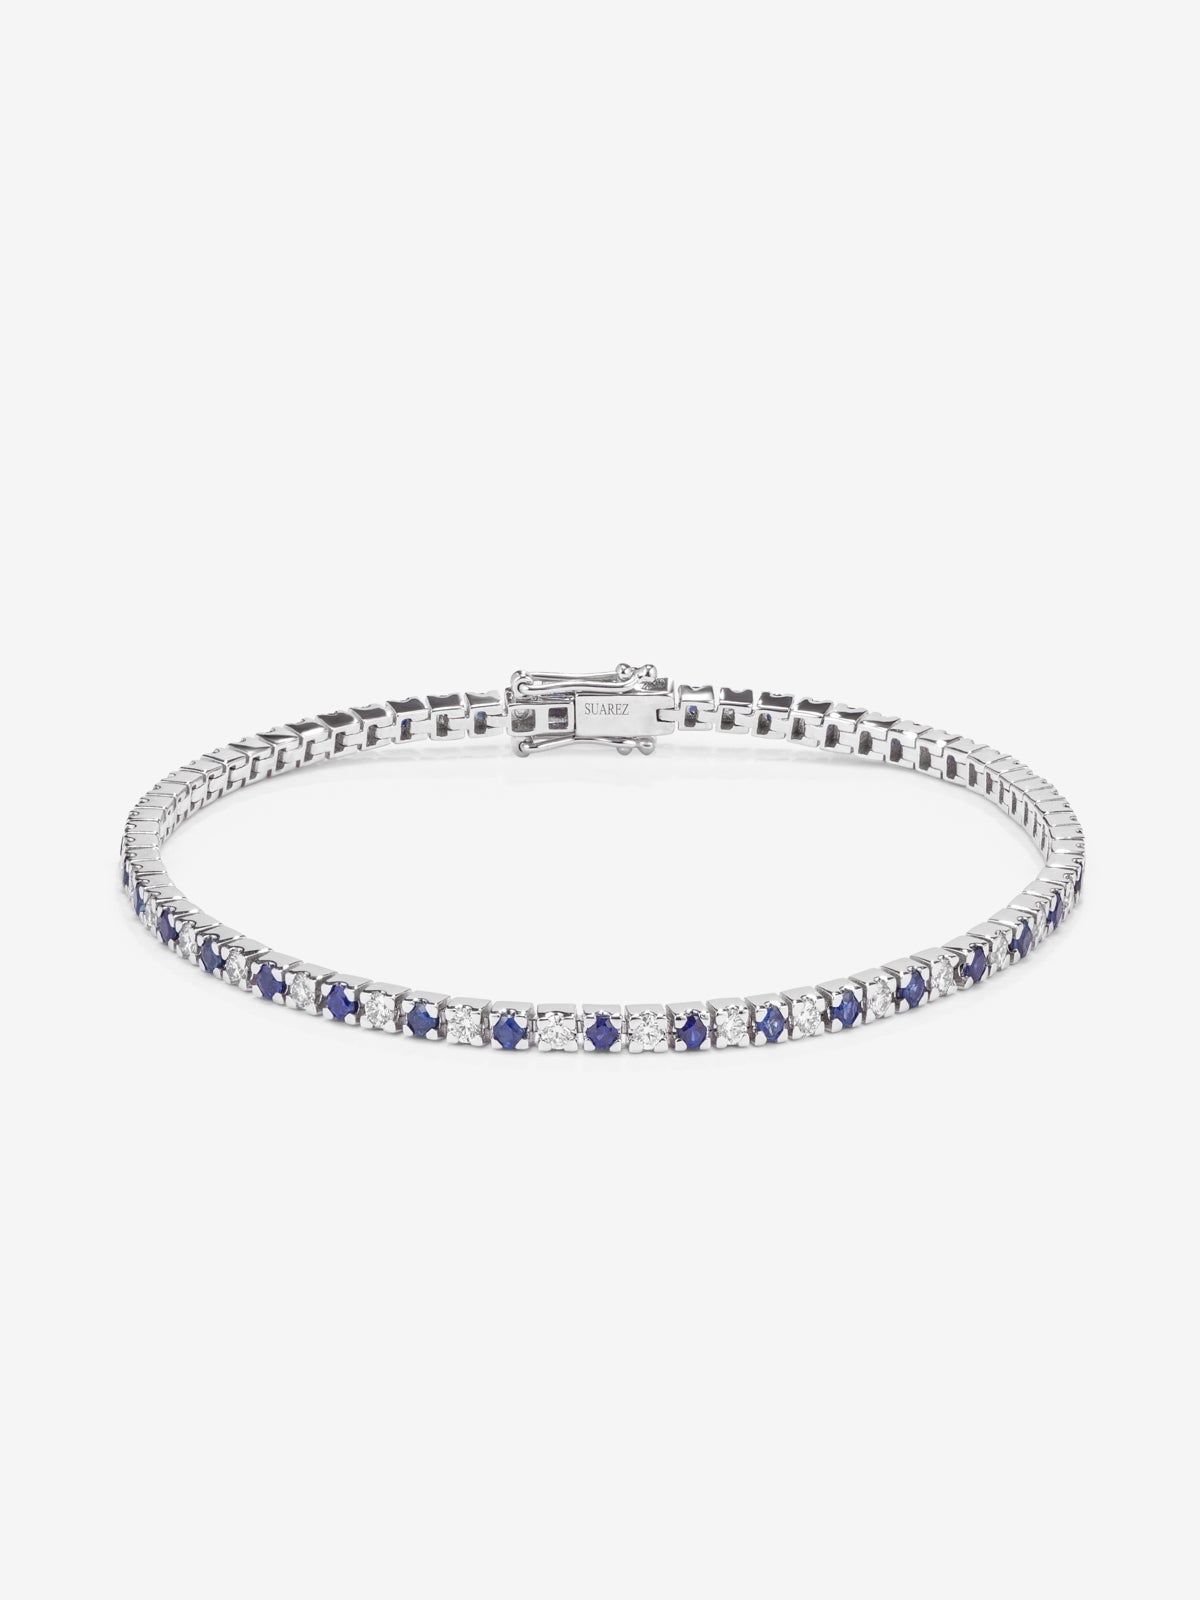 18K white gold bracelet with 37 brilliant-cut diamonds with a total of 0.88 cts and 38 brilliant-cut blue sapphires with a total of 0.95 cts